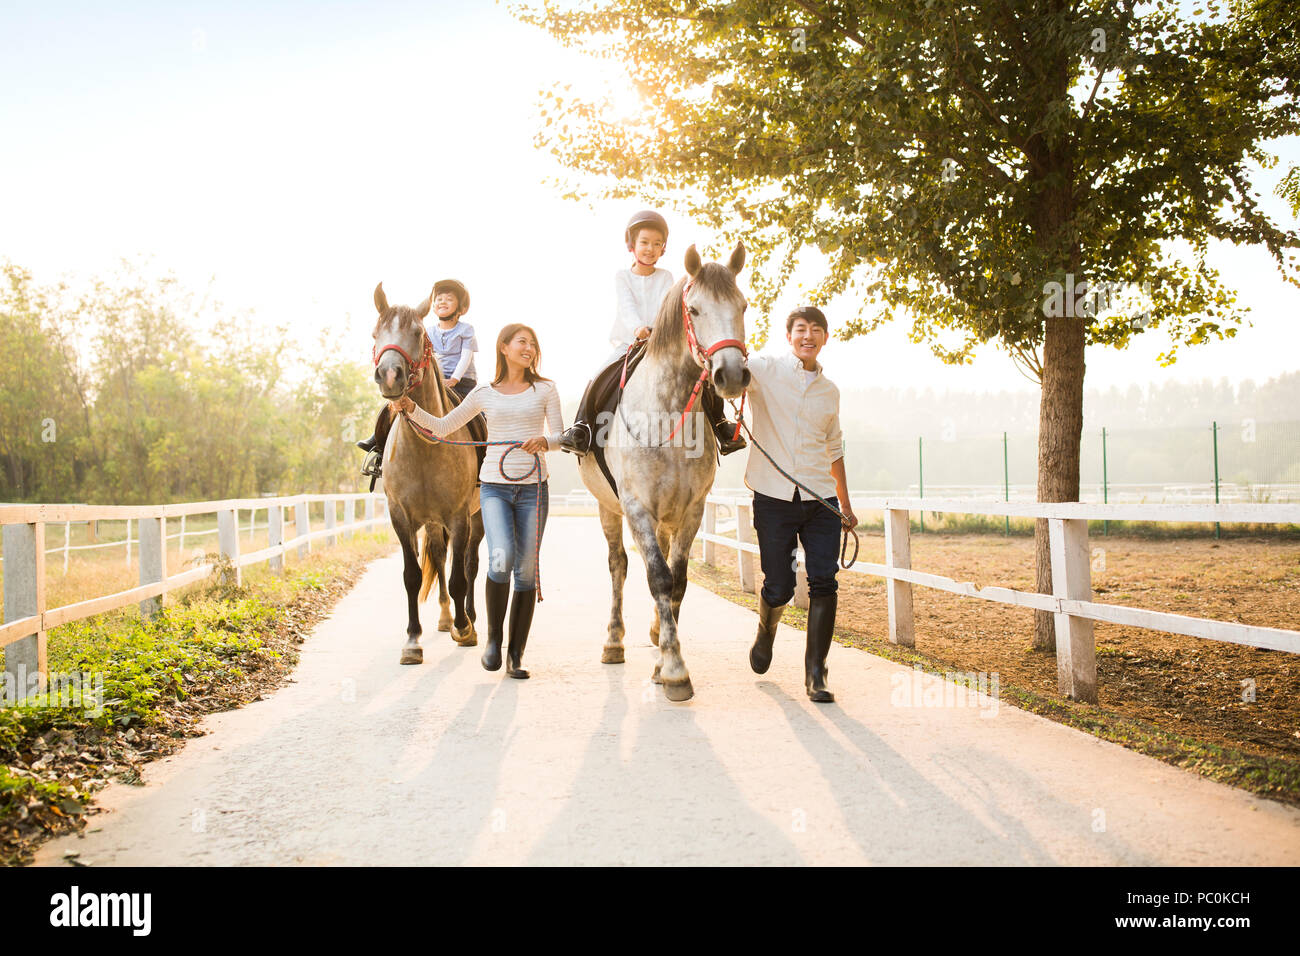 Cheerful young Chinese family riding horses Banque D'Images